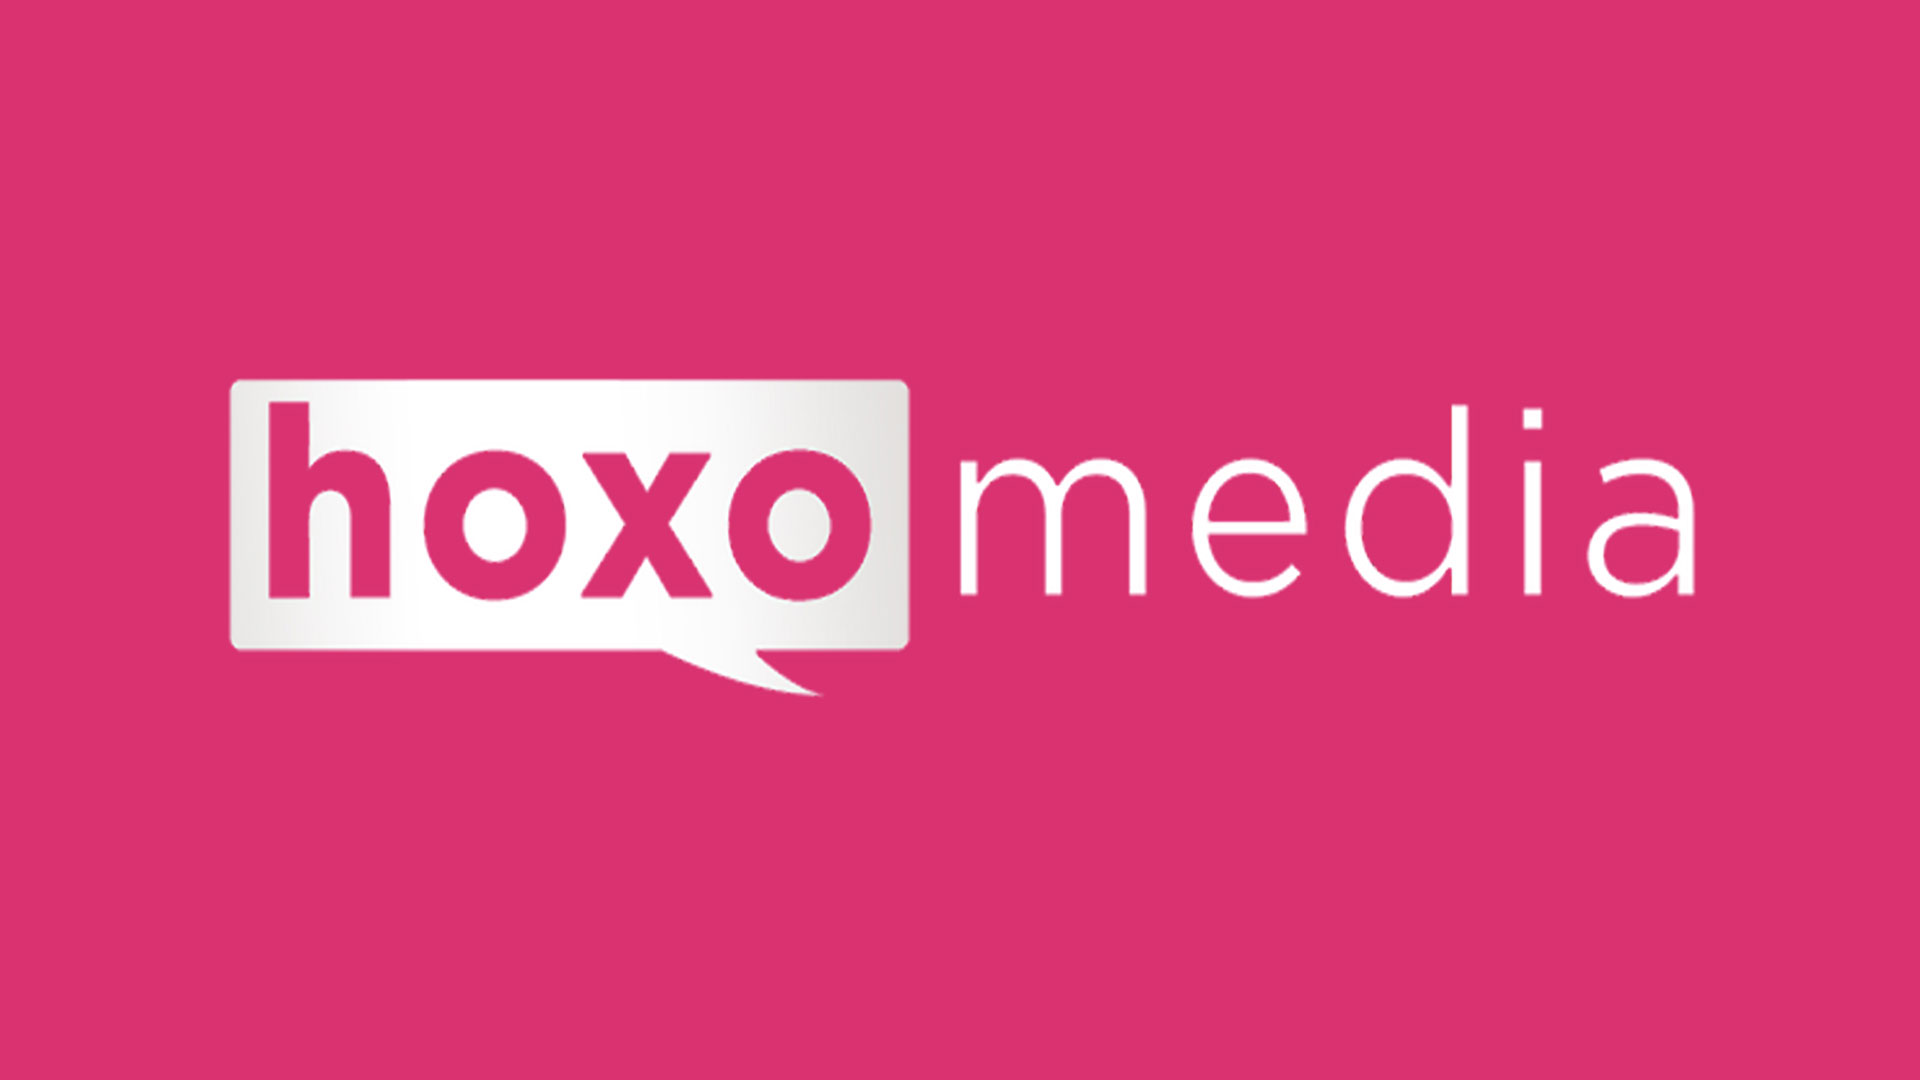 Hoxo Media Join The Recruitment Network as a Bronze Sponsor